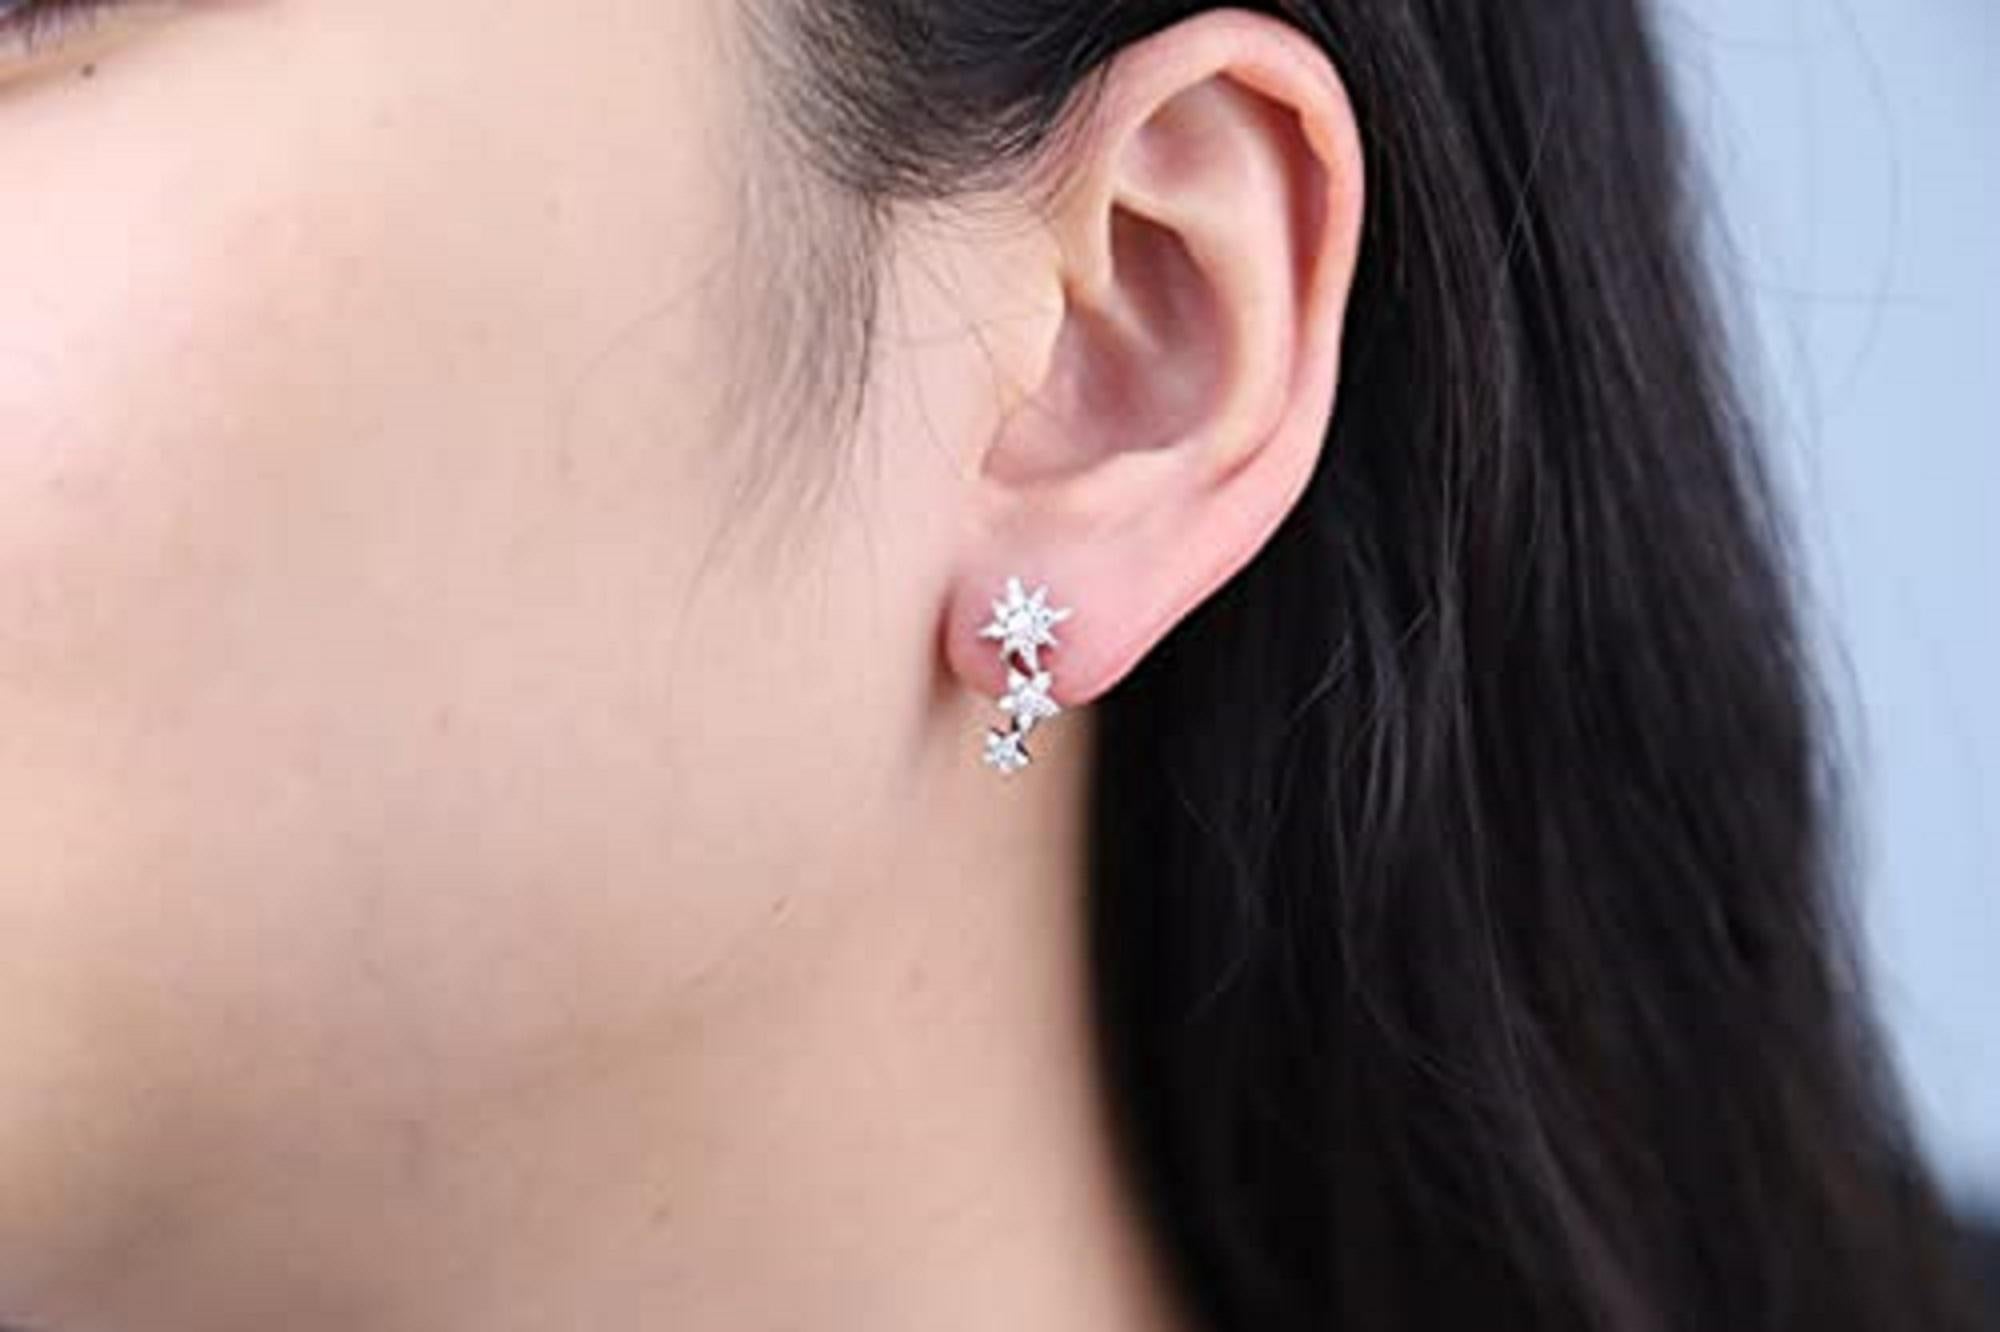 Decorate yourself in elegance with this Earing is crafted from 14-karat White Gold by Gin & Grace Earring. This Earring is made up of Round-Cut White Diamond (52 Pcs) 0.46 Carat. This Earring is weight 2.51 grams. This delicate Earring is polished